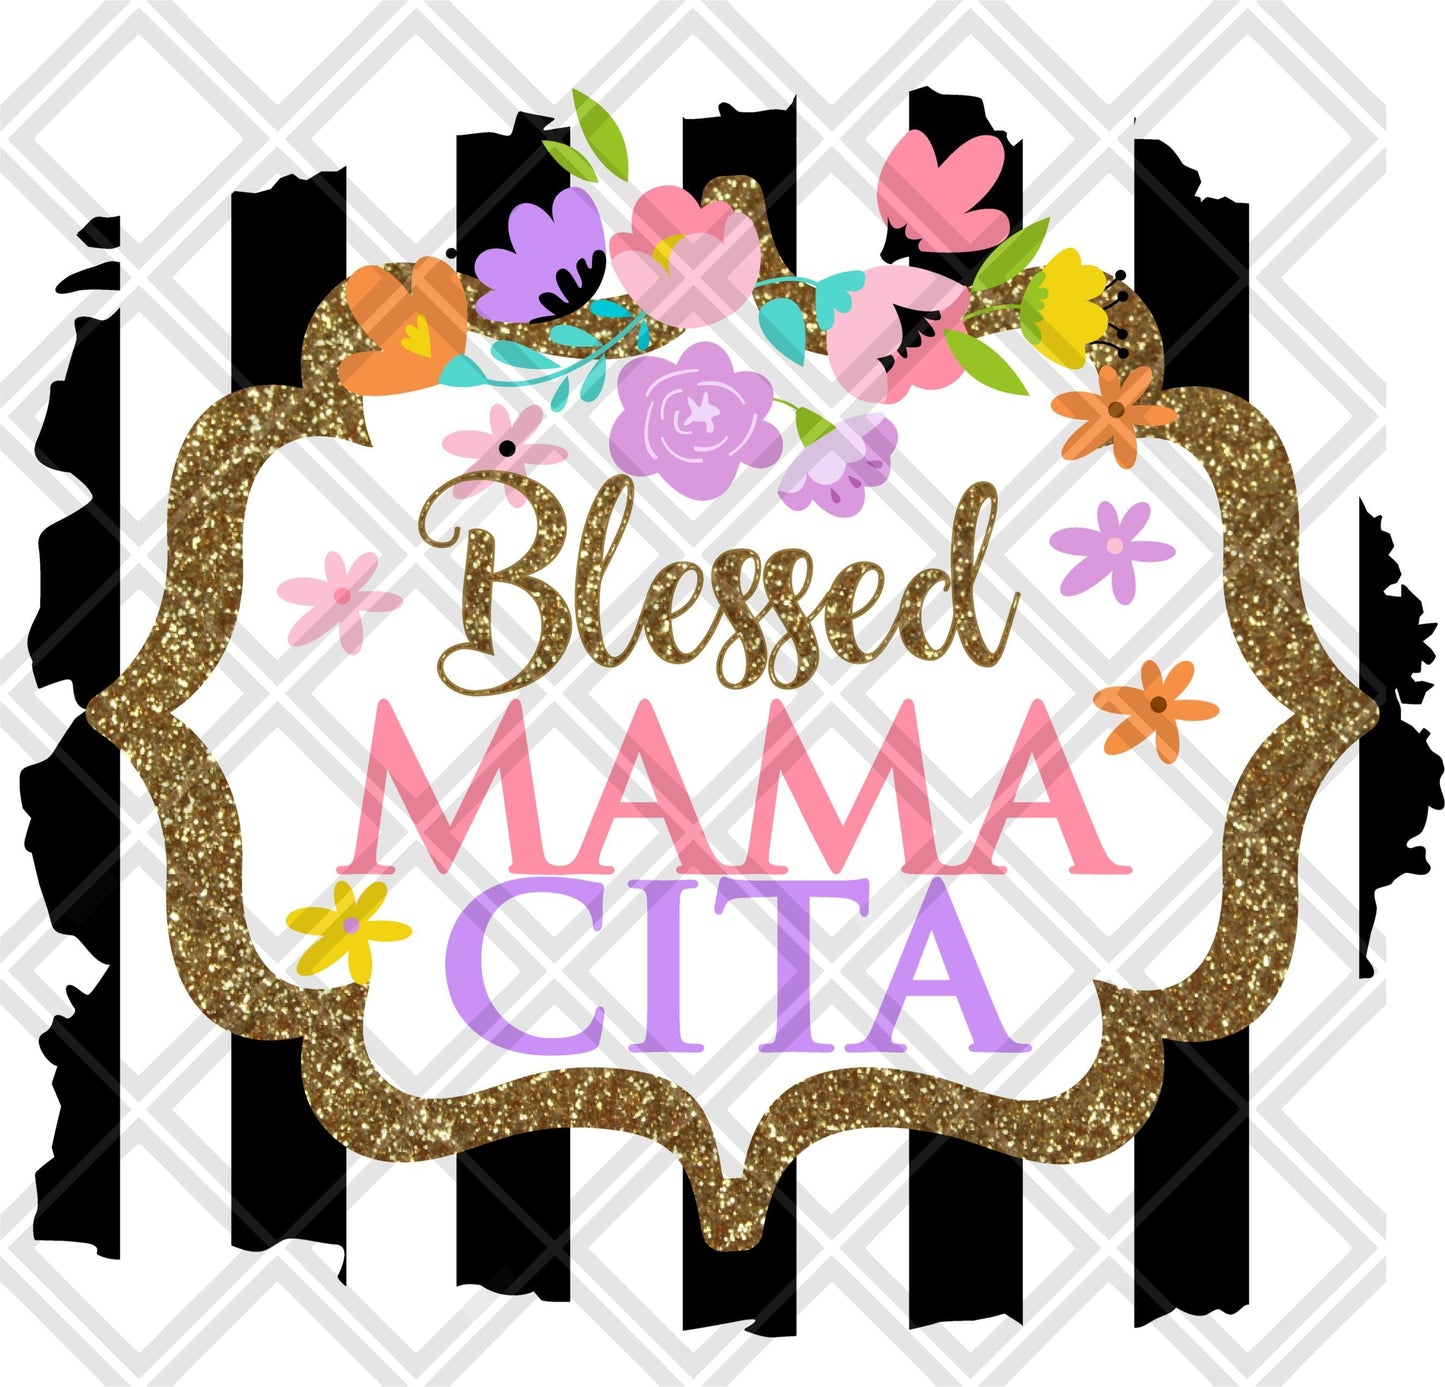 Blessed Mama Cita DTF TRANSFERPRINT TO ORDER